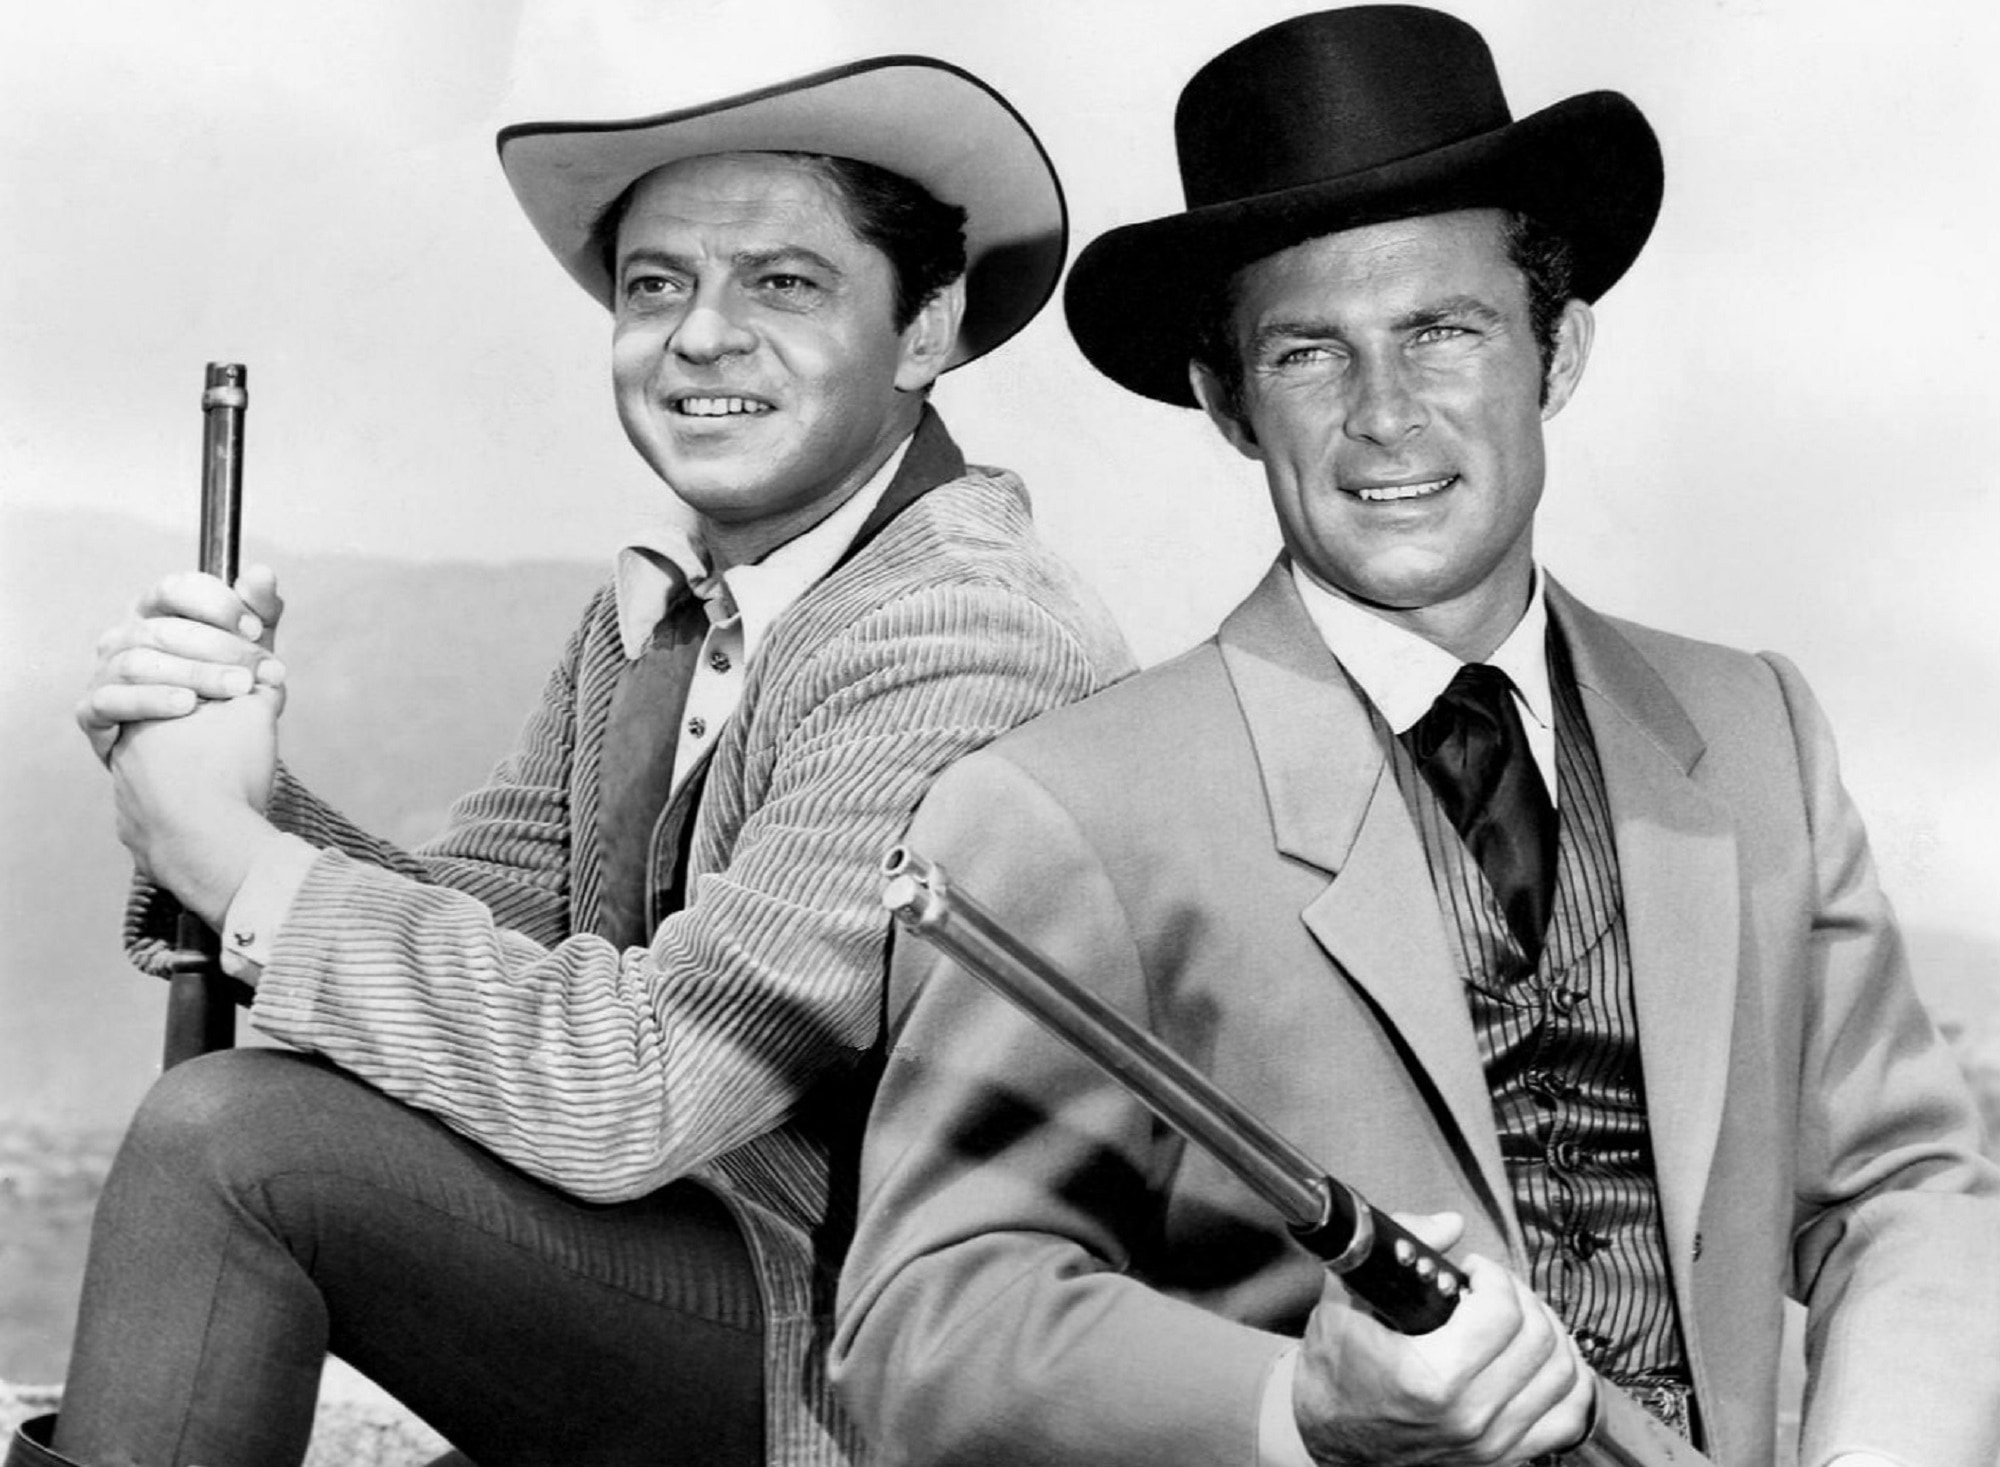 grayscale photo of two men with hats holding guns and smiling